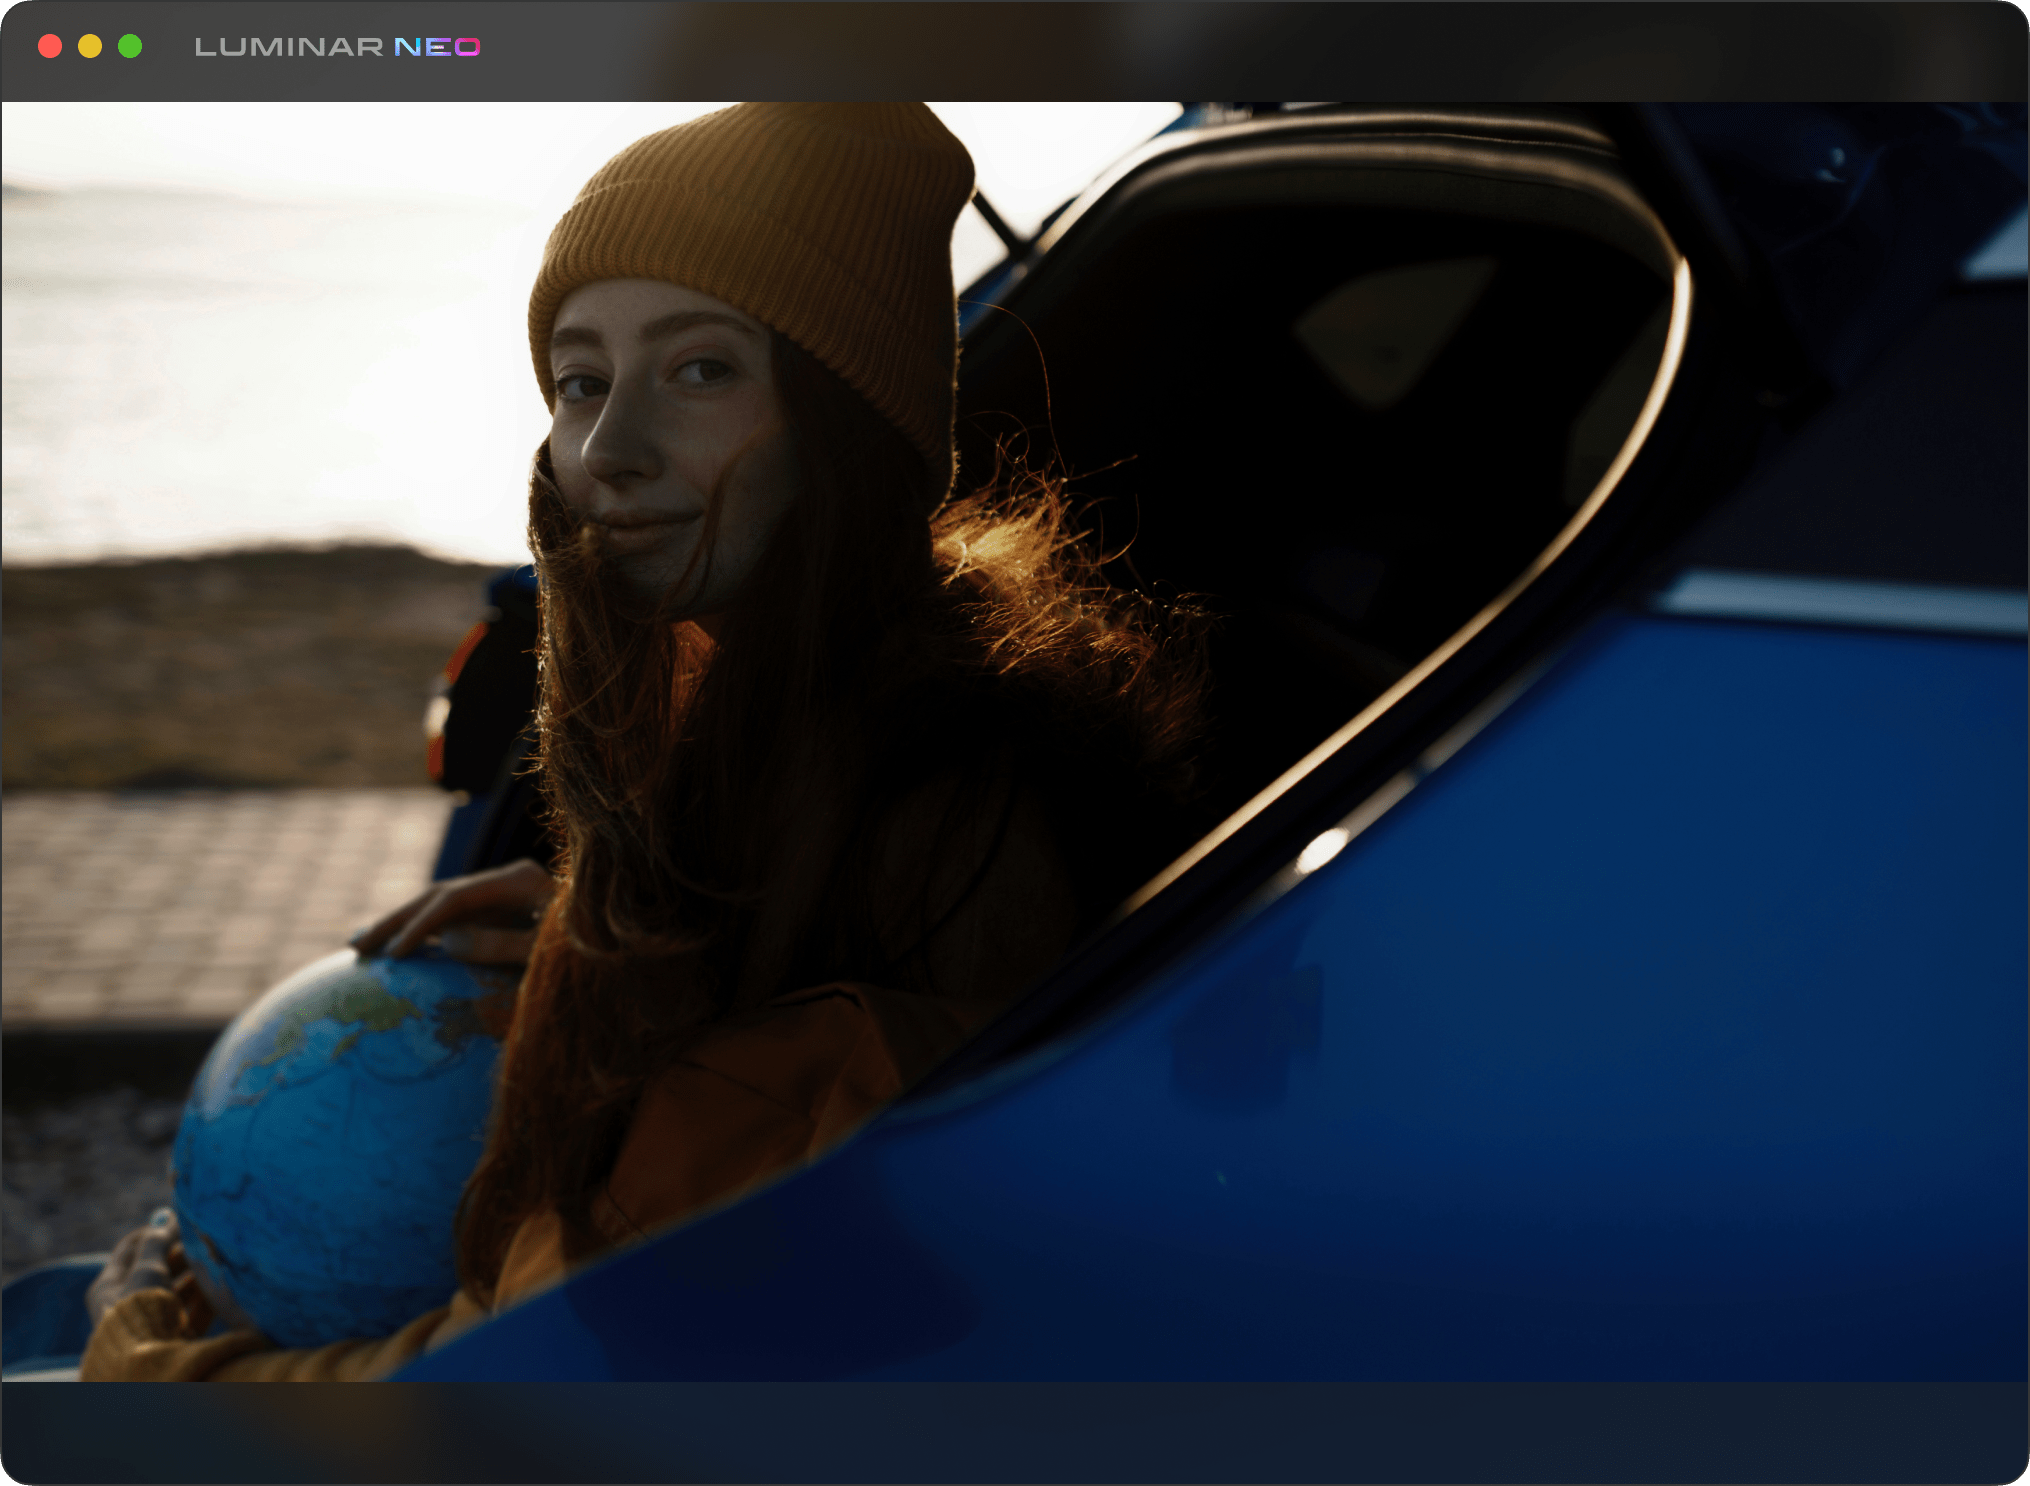 Image Brightener — Enhance Your Photos with AI-Powered Brightening Technology